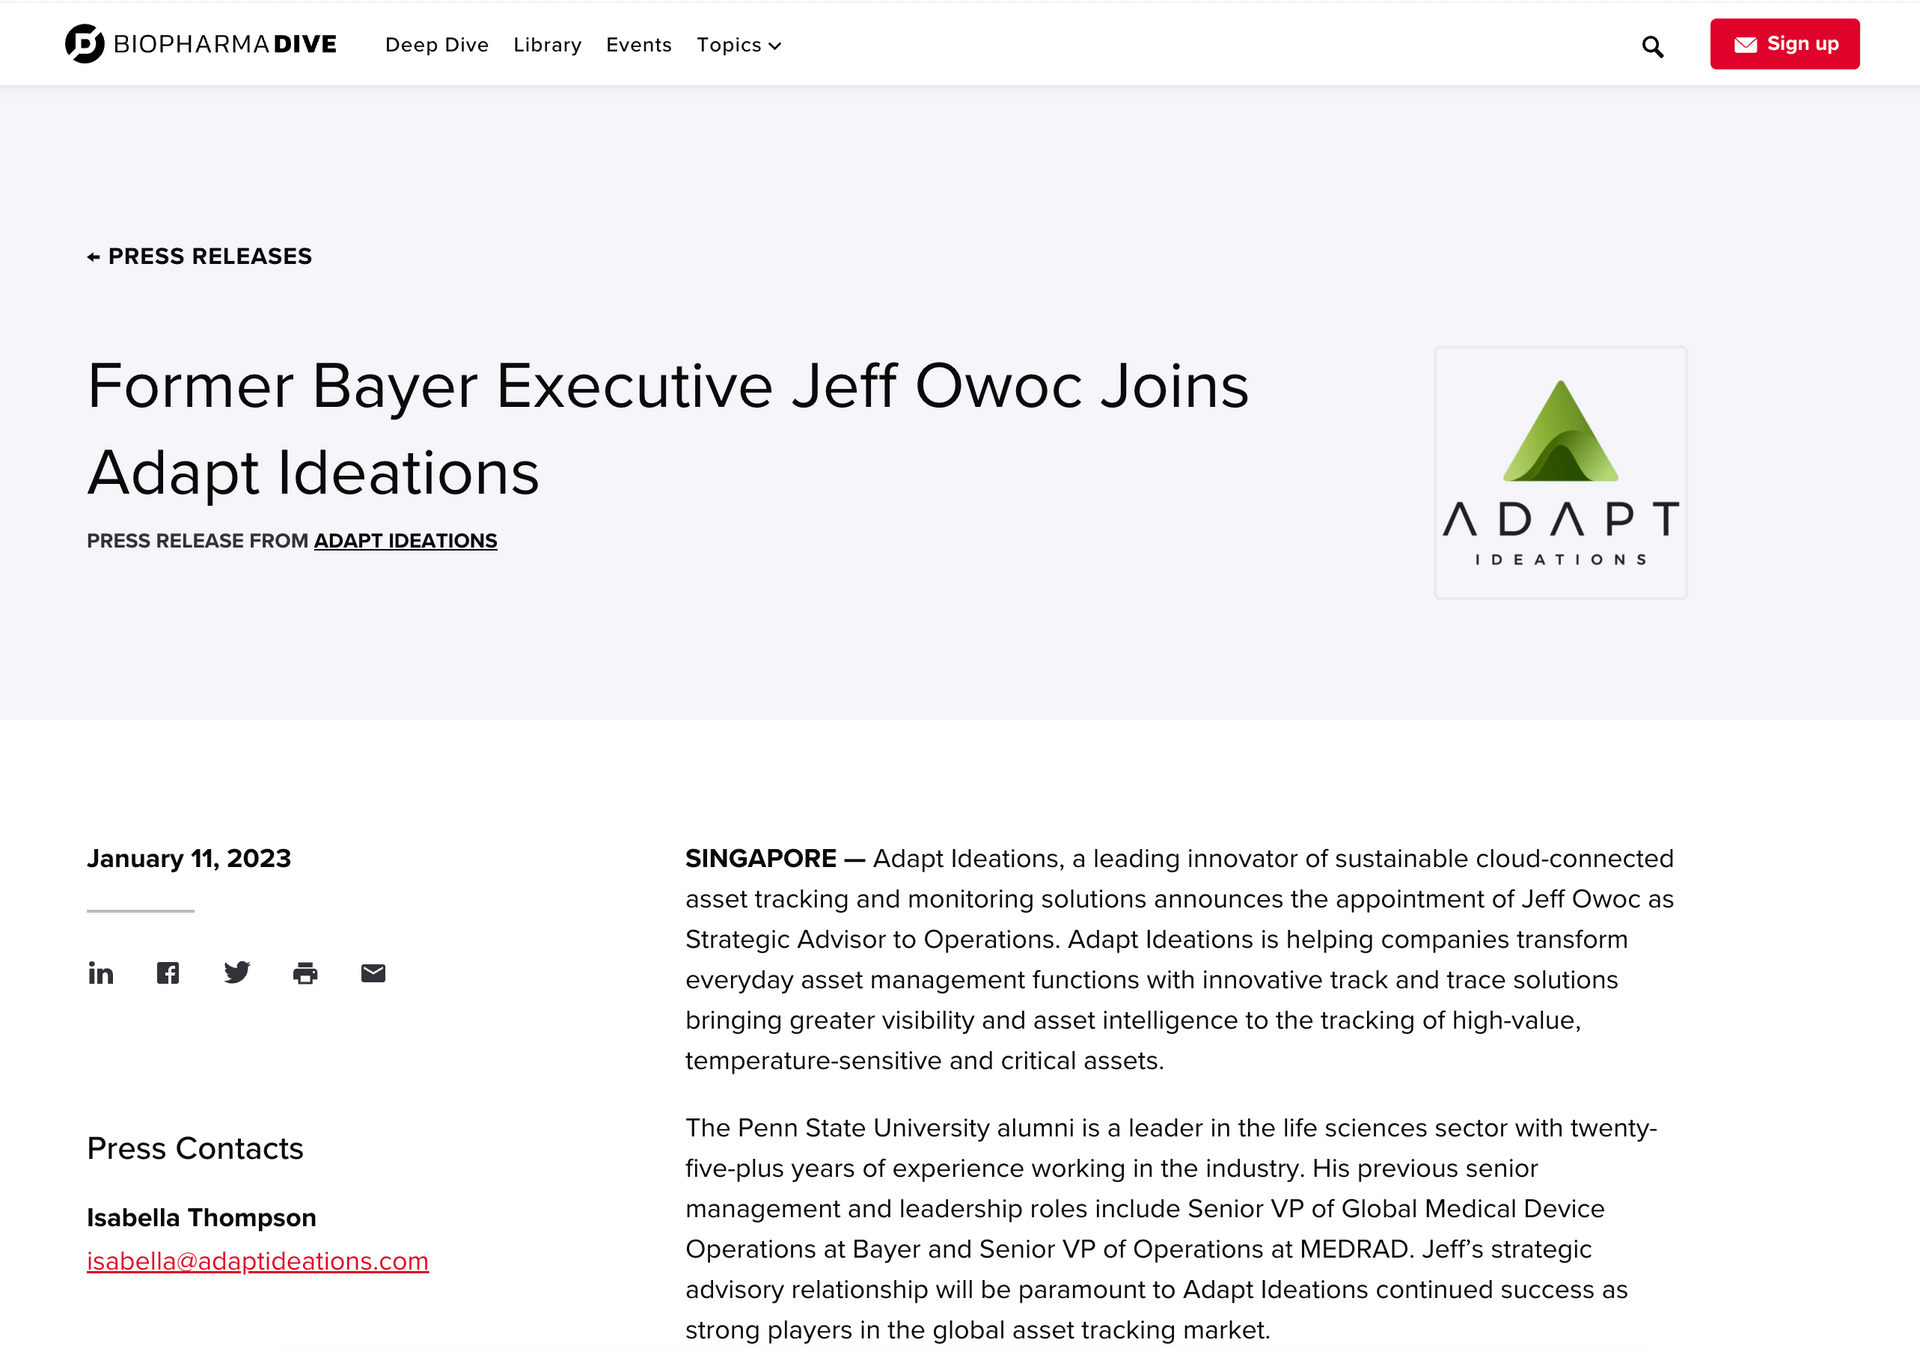 A former bayer executive jeff owoc joins adapt ideas